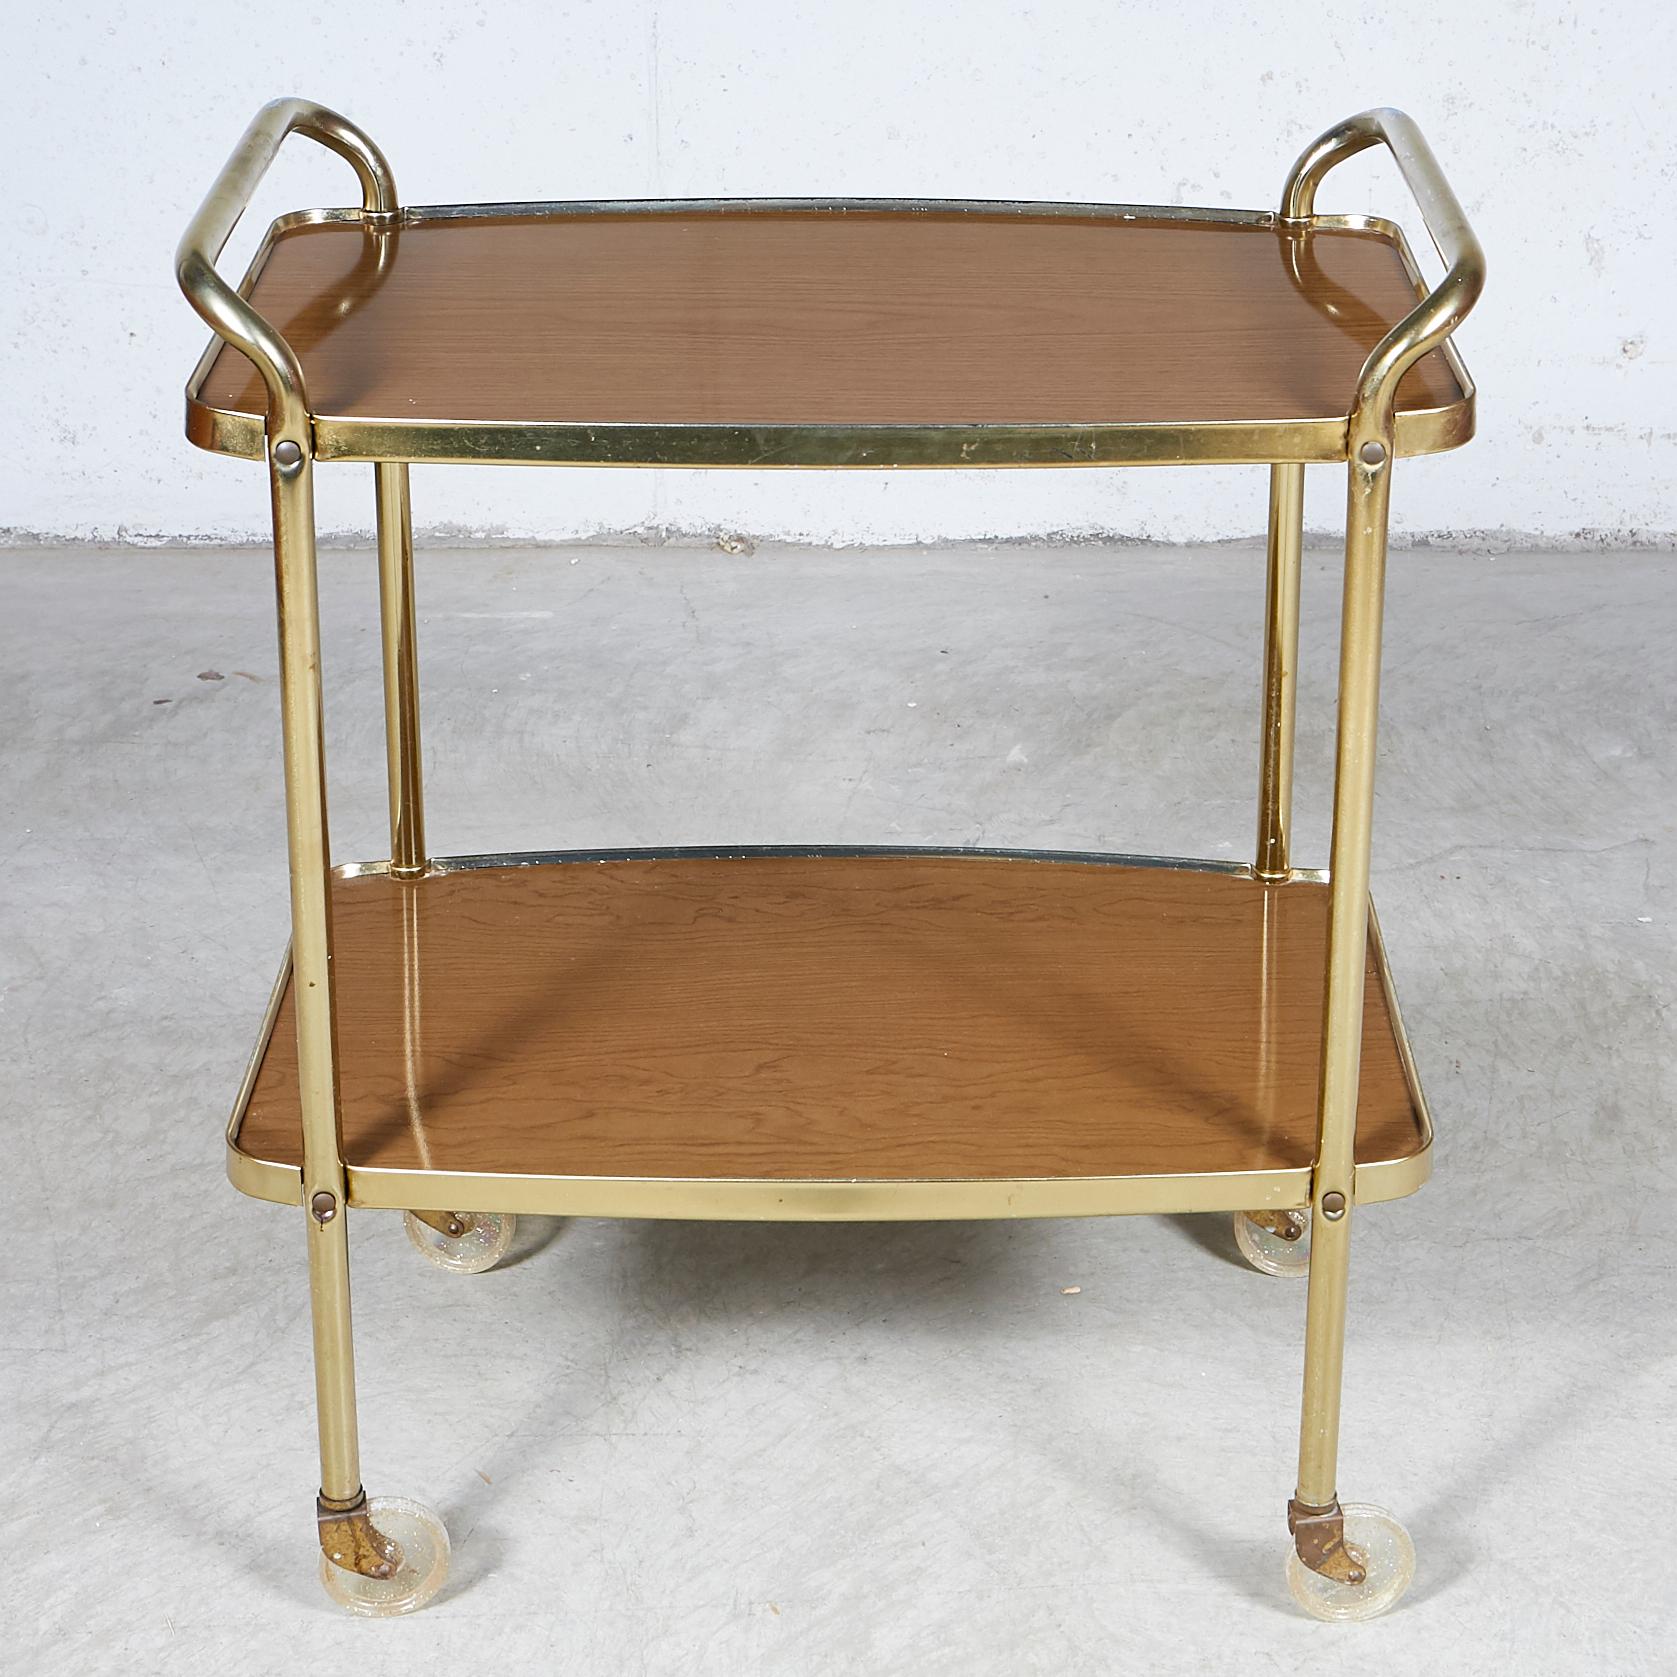 Vintage 1960s wood grain laminated two-shelf rolling serving cart by Cosco. The rolling cart has a gold metal accent. Light wear from use. Marked.